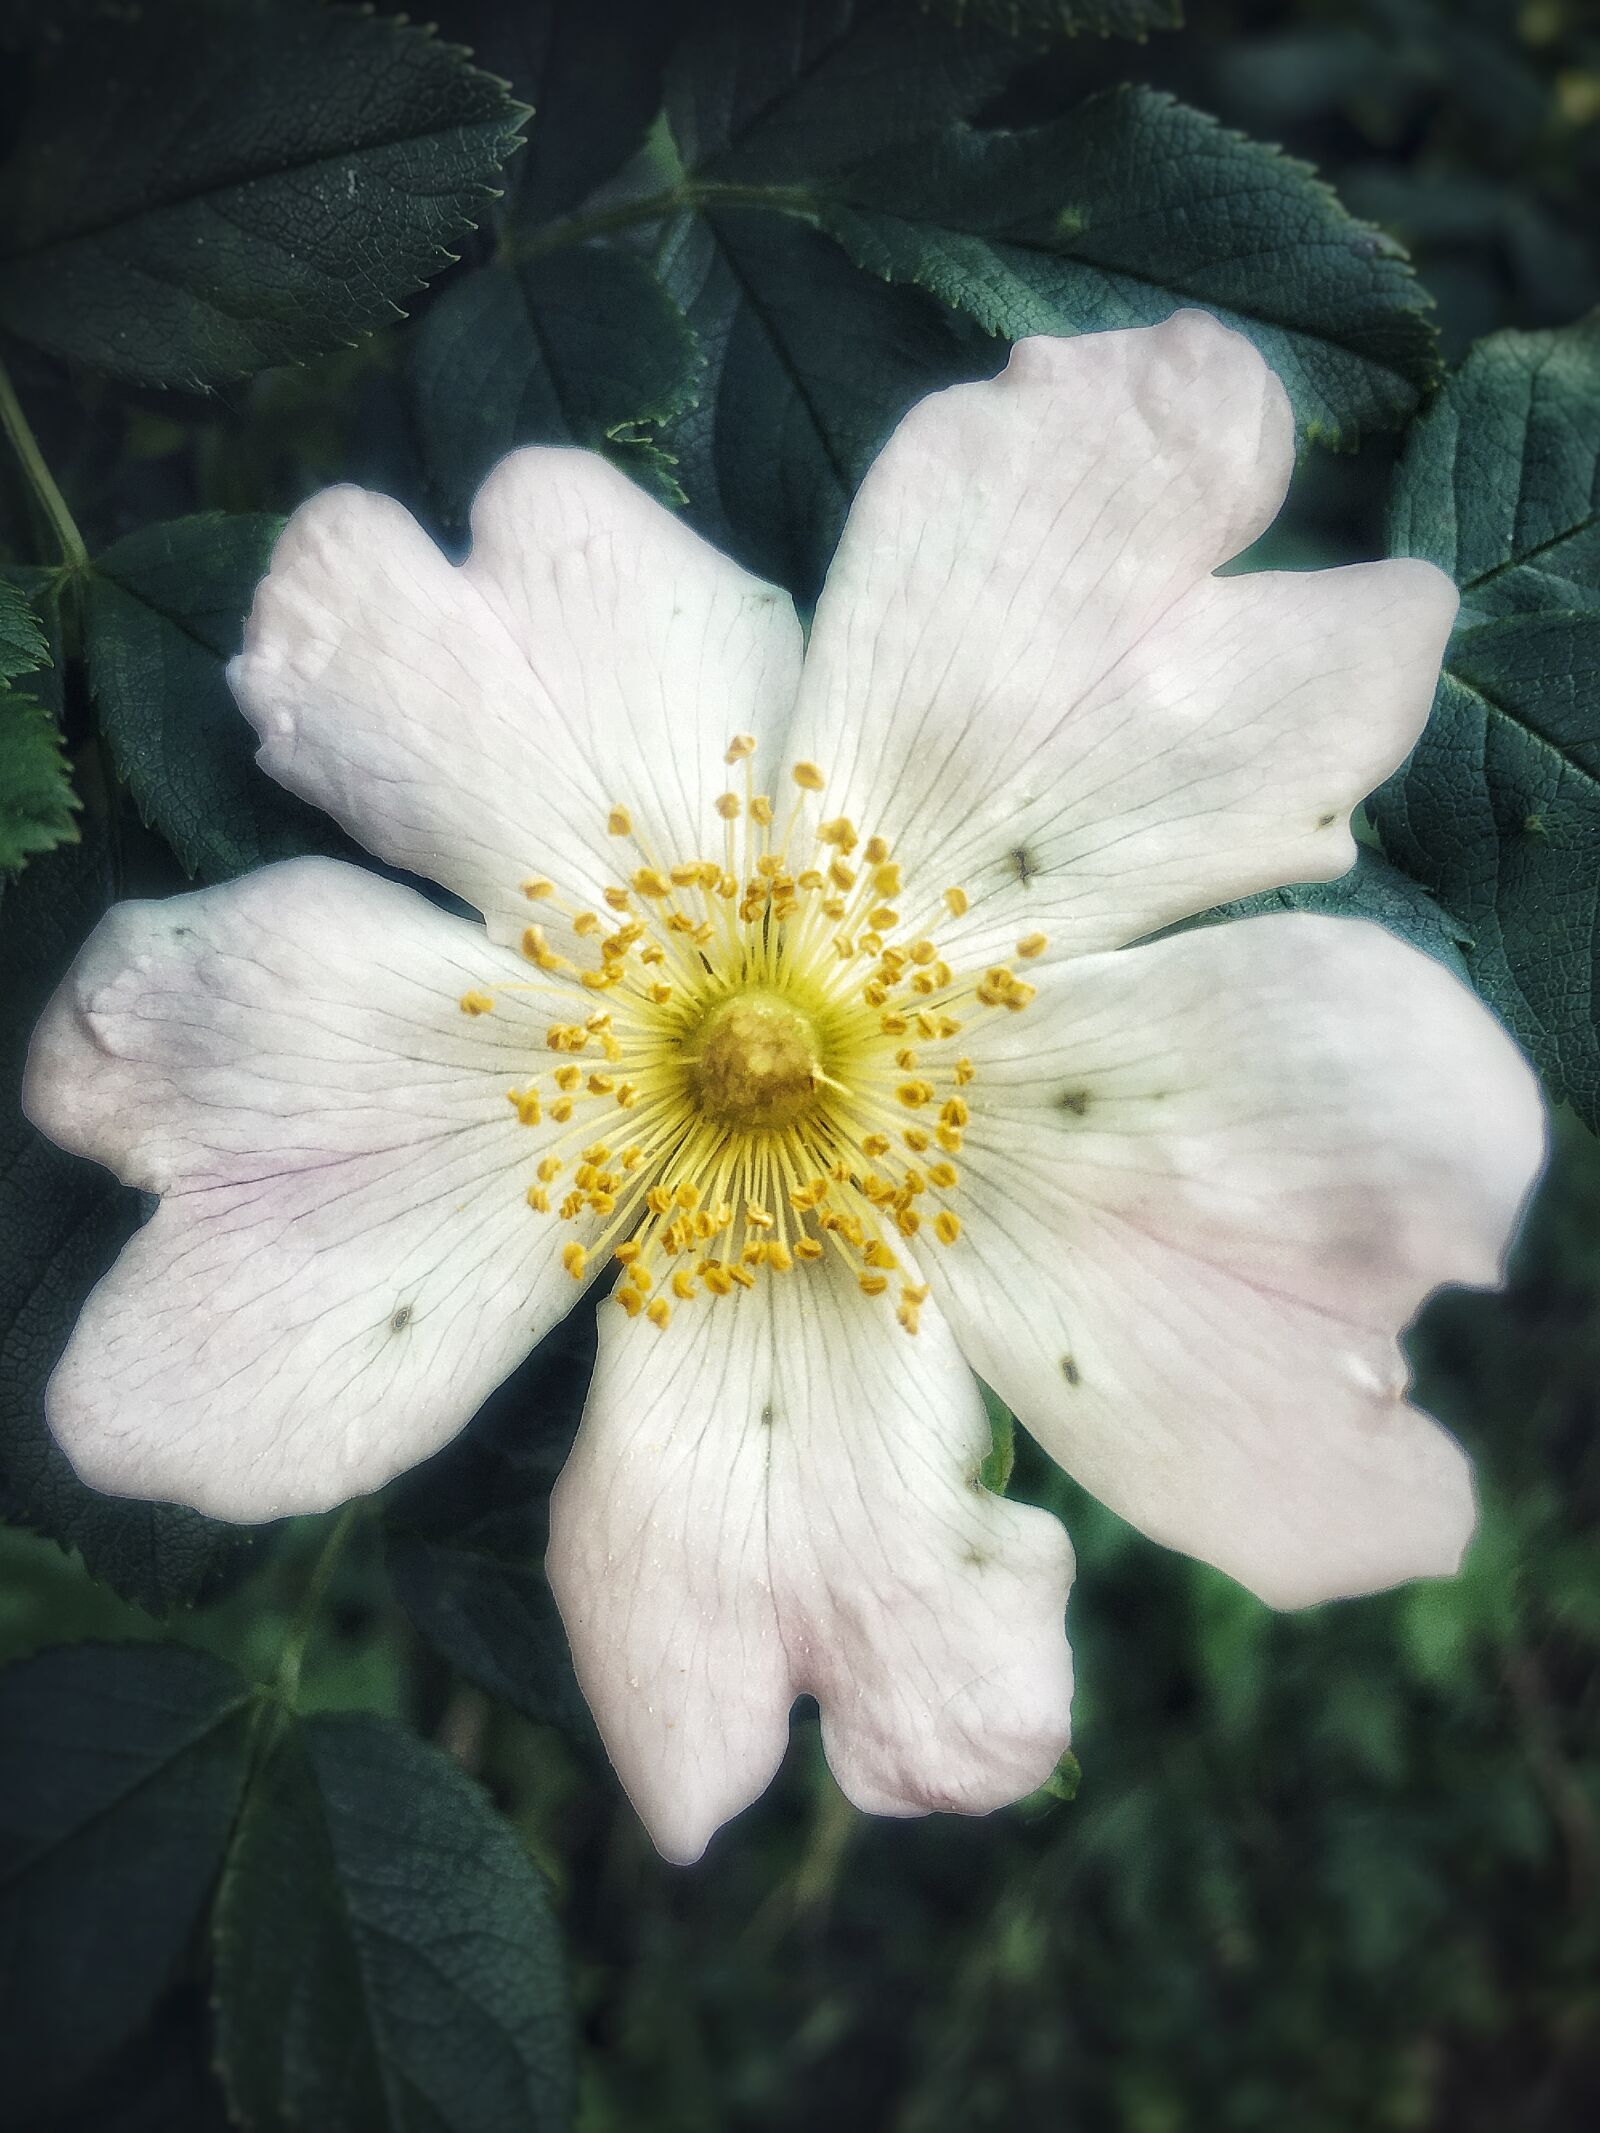 Apple iPhone 6s Plus + iPhone 6s Plus back camera 4.15mm f/2.2 sample photo. Nature, flower, summer photography